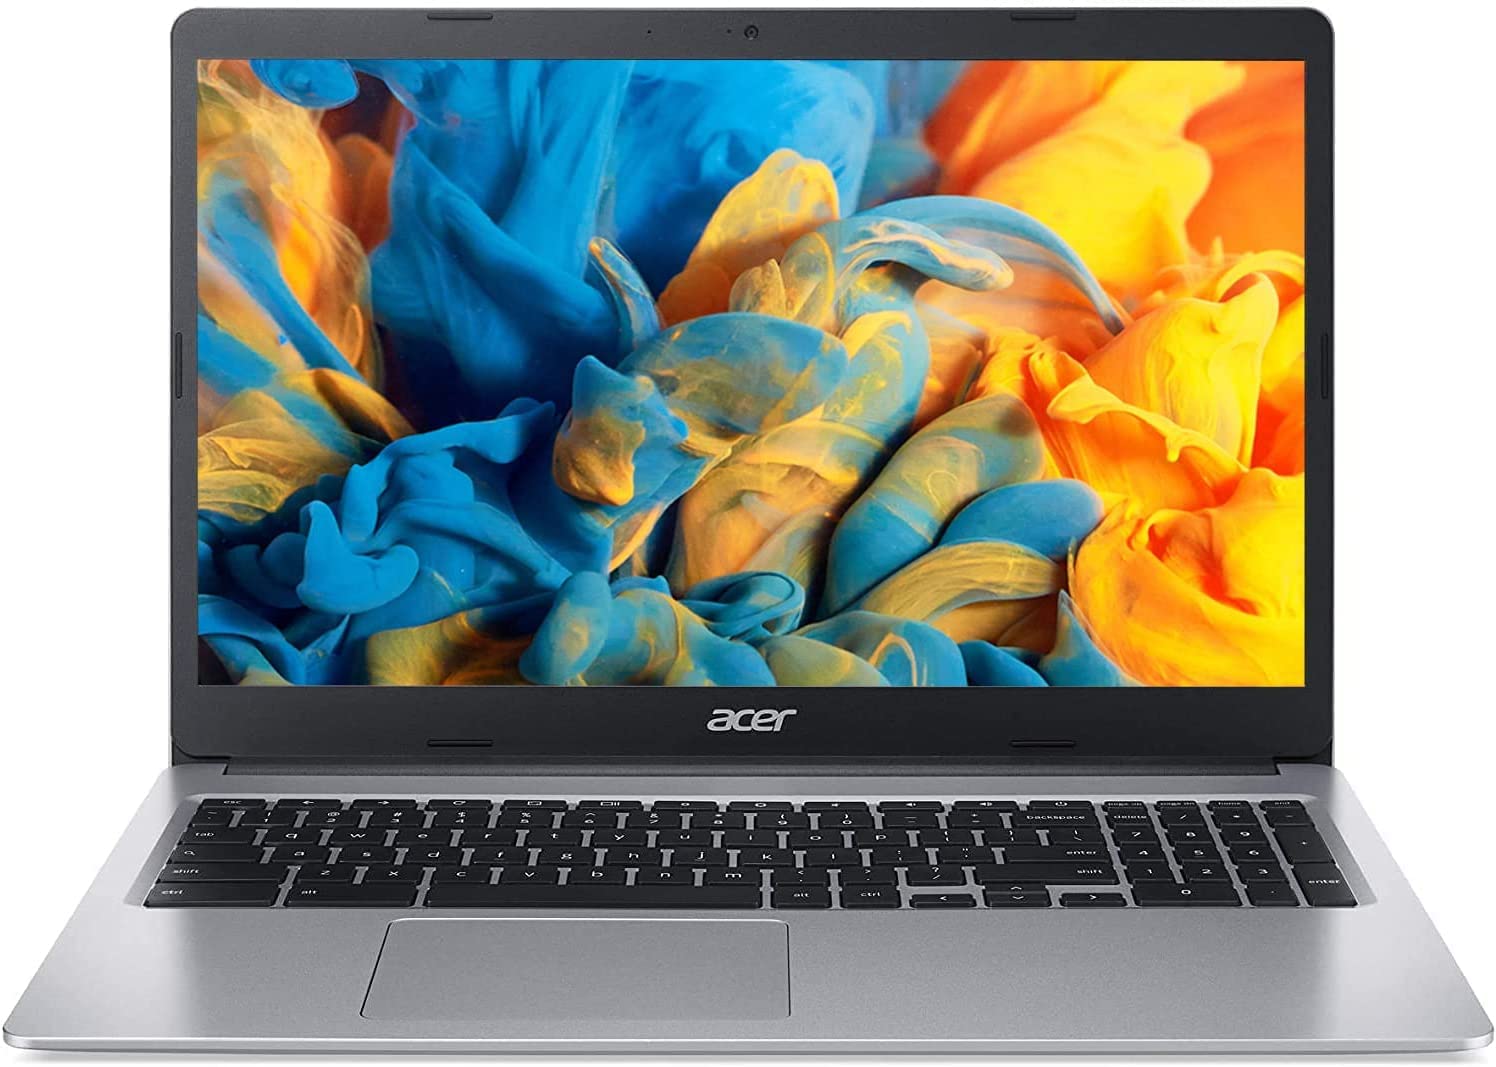 Acer 2022 15inch HD IPS Chromebook, Intel Dual-Core Celeron Processor Up to 2.55GHz, 4GB RAM, 64GB Storage, Super-Fast WiFi Up to 1300 Mbps, Chrome OS-(Renewed) (Dale Silver)